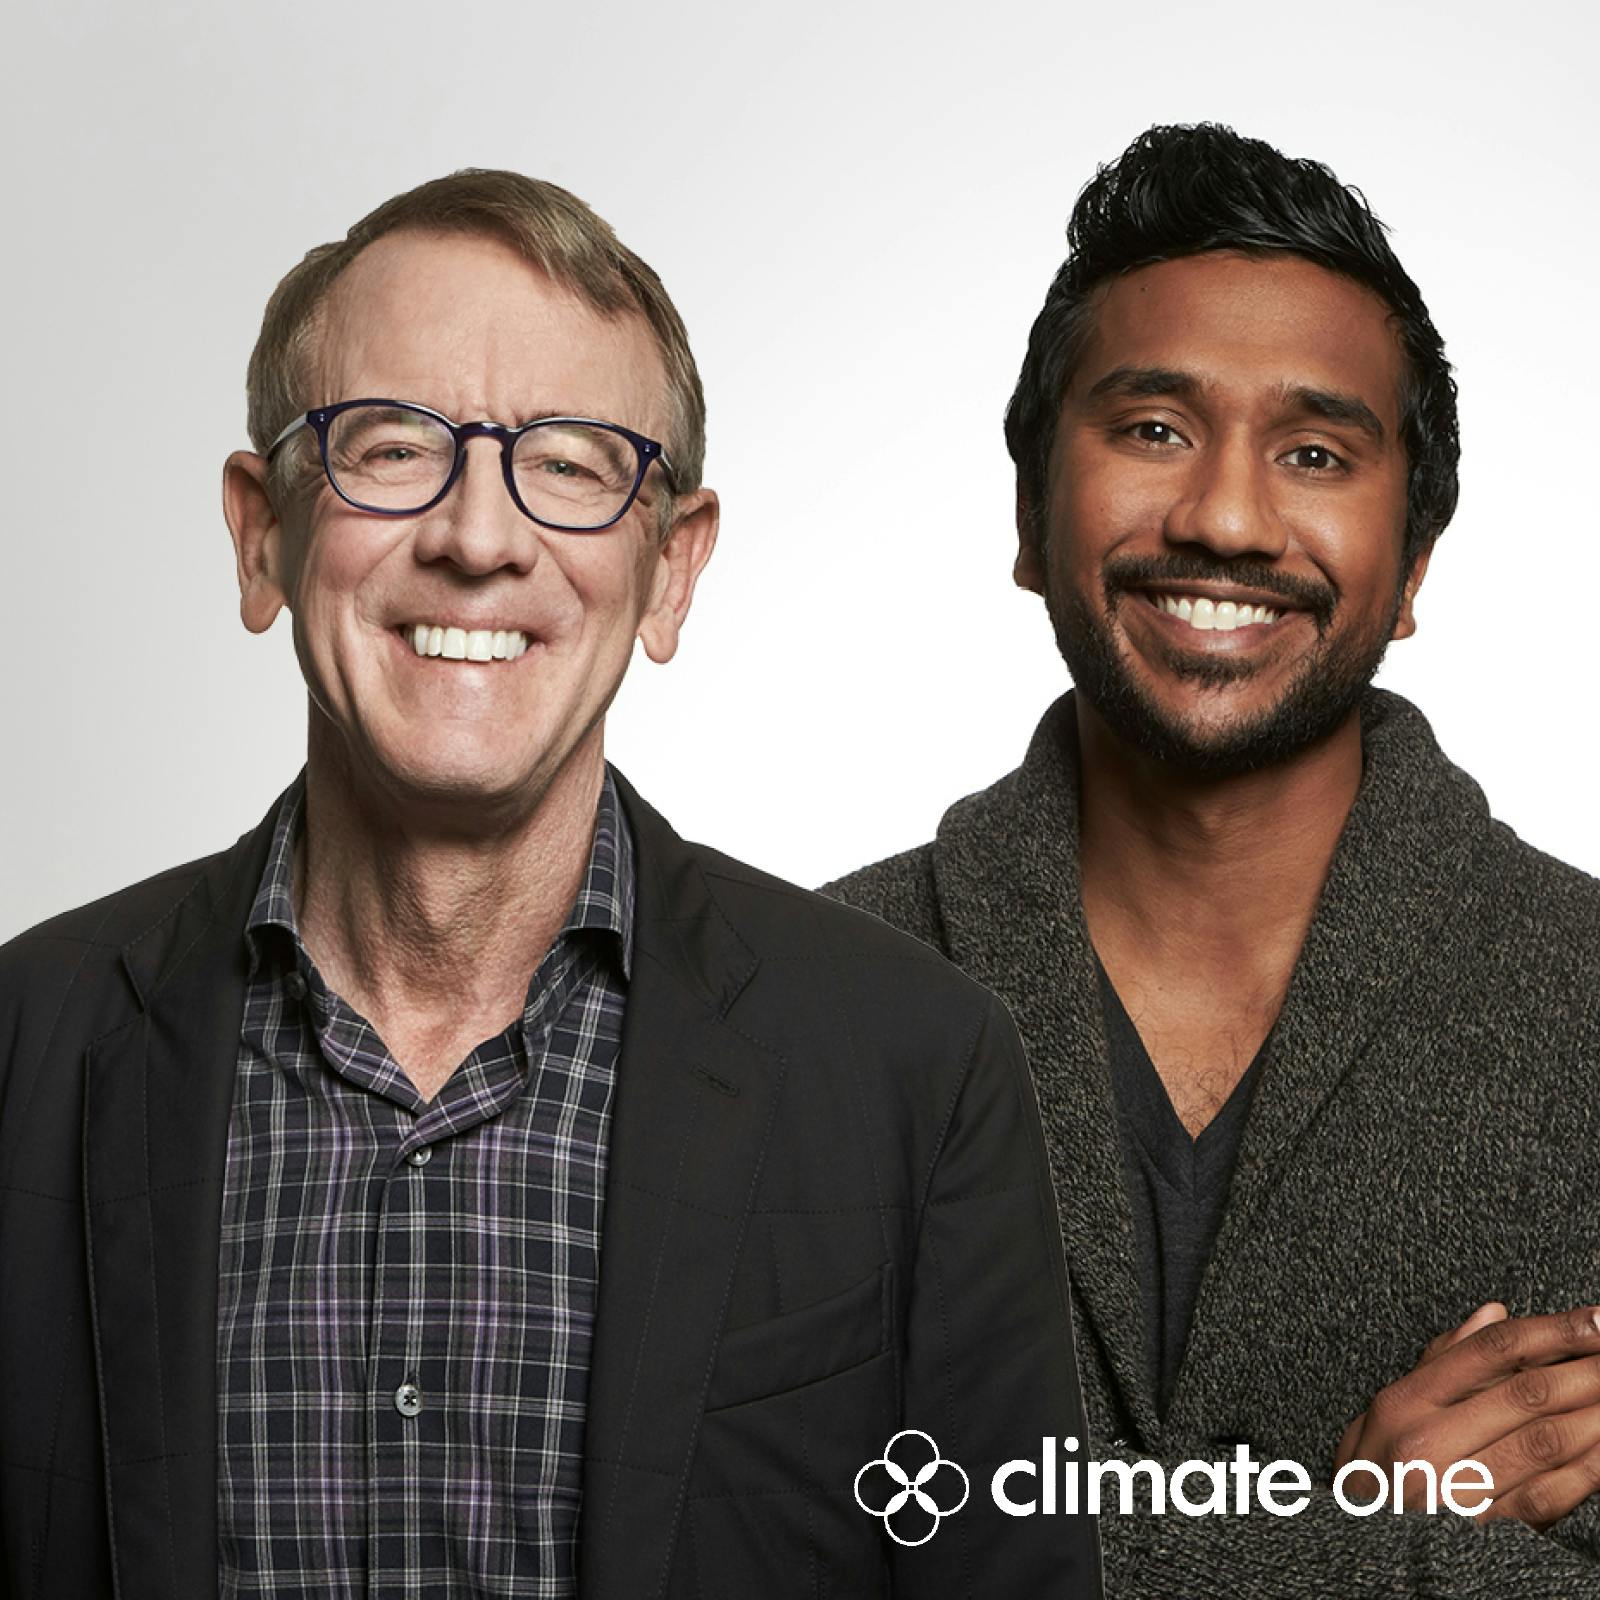 John Doerr And Ryan Panchadsaram: An Action Plan For Solving Our Climate Crisis Now